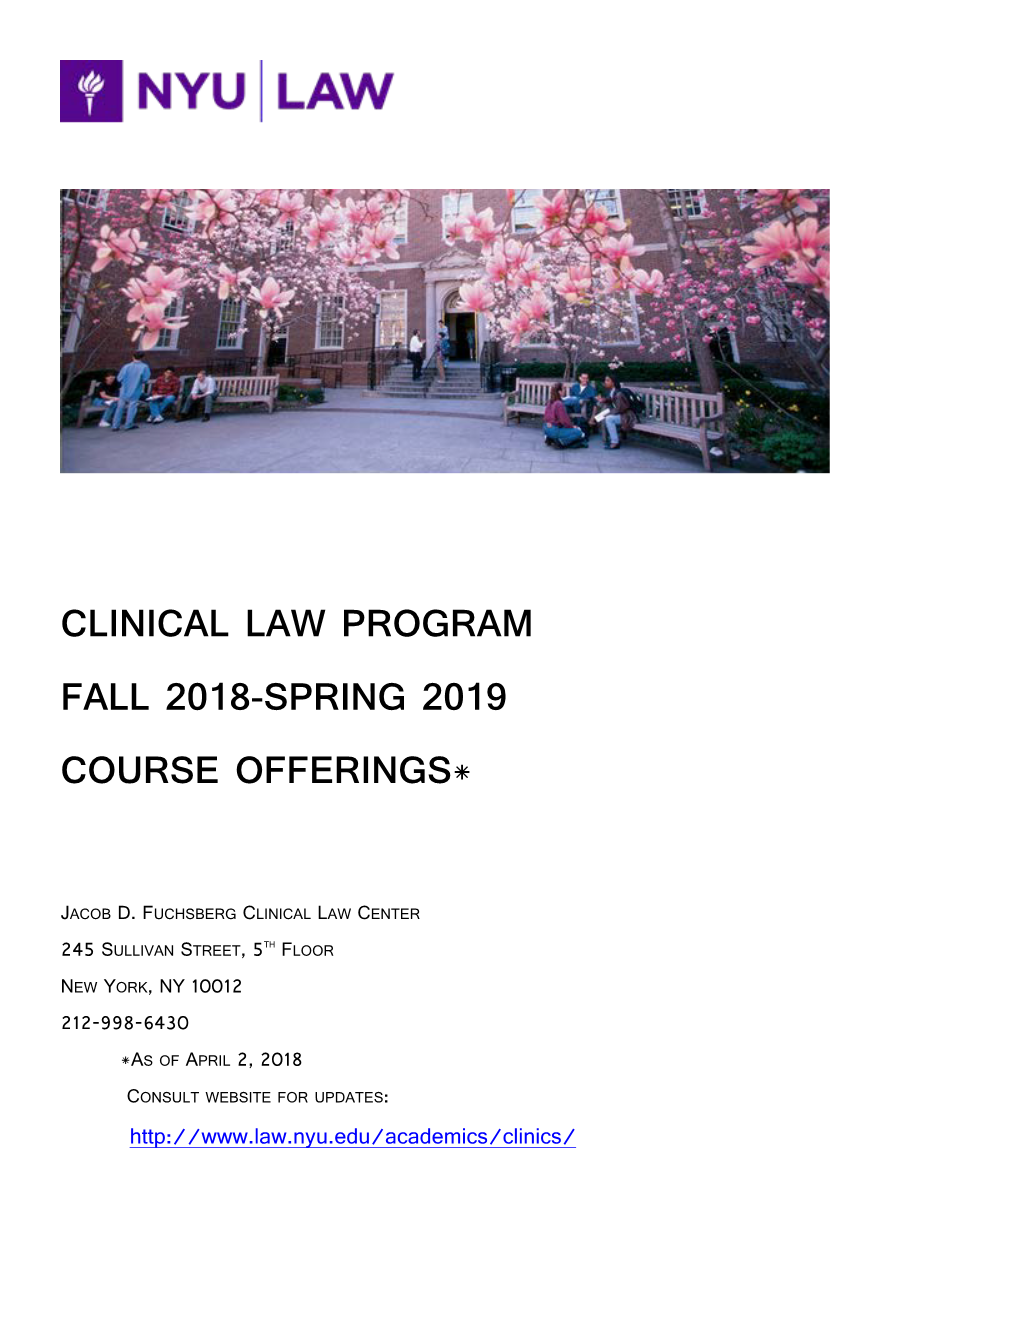 Clinical Law Program Fall 2018-Spring 2019 Course Offerings*